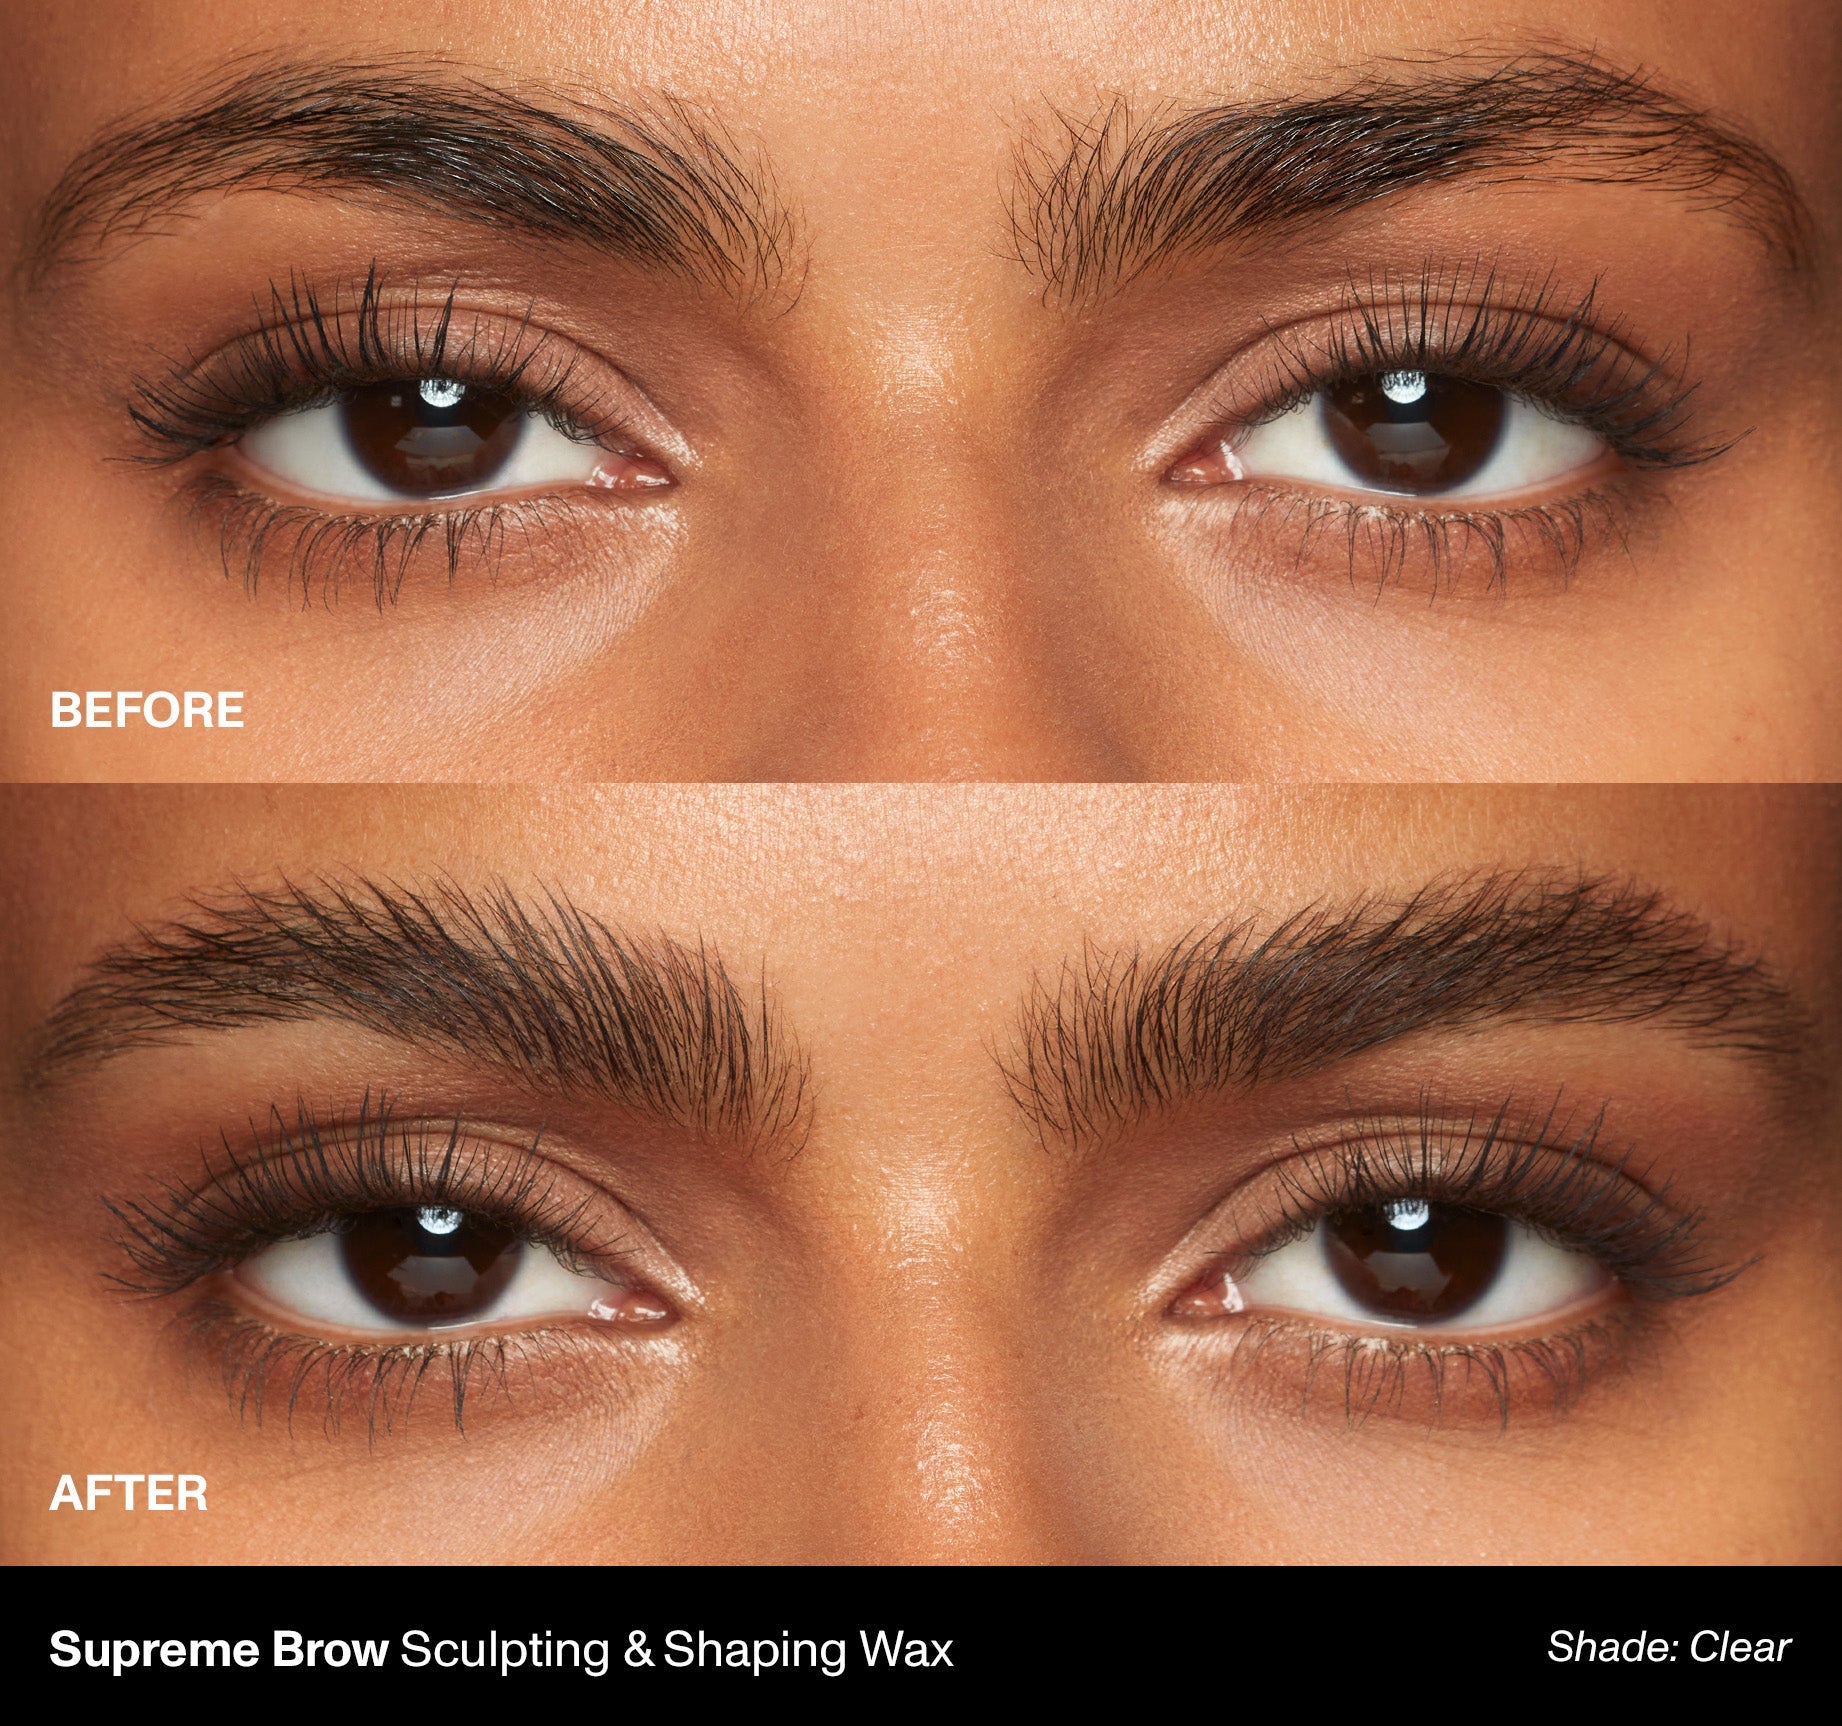 Supreme Brow Sculpting and Shaping Wax - Clear - Image 5